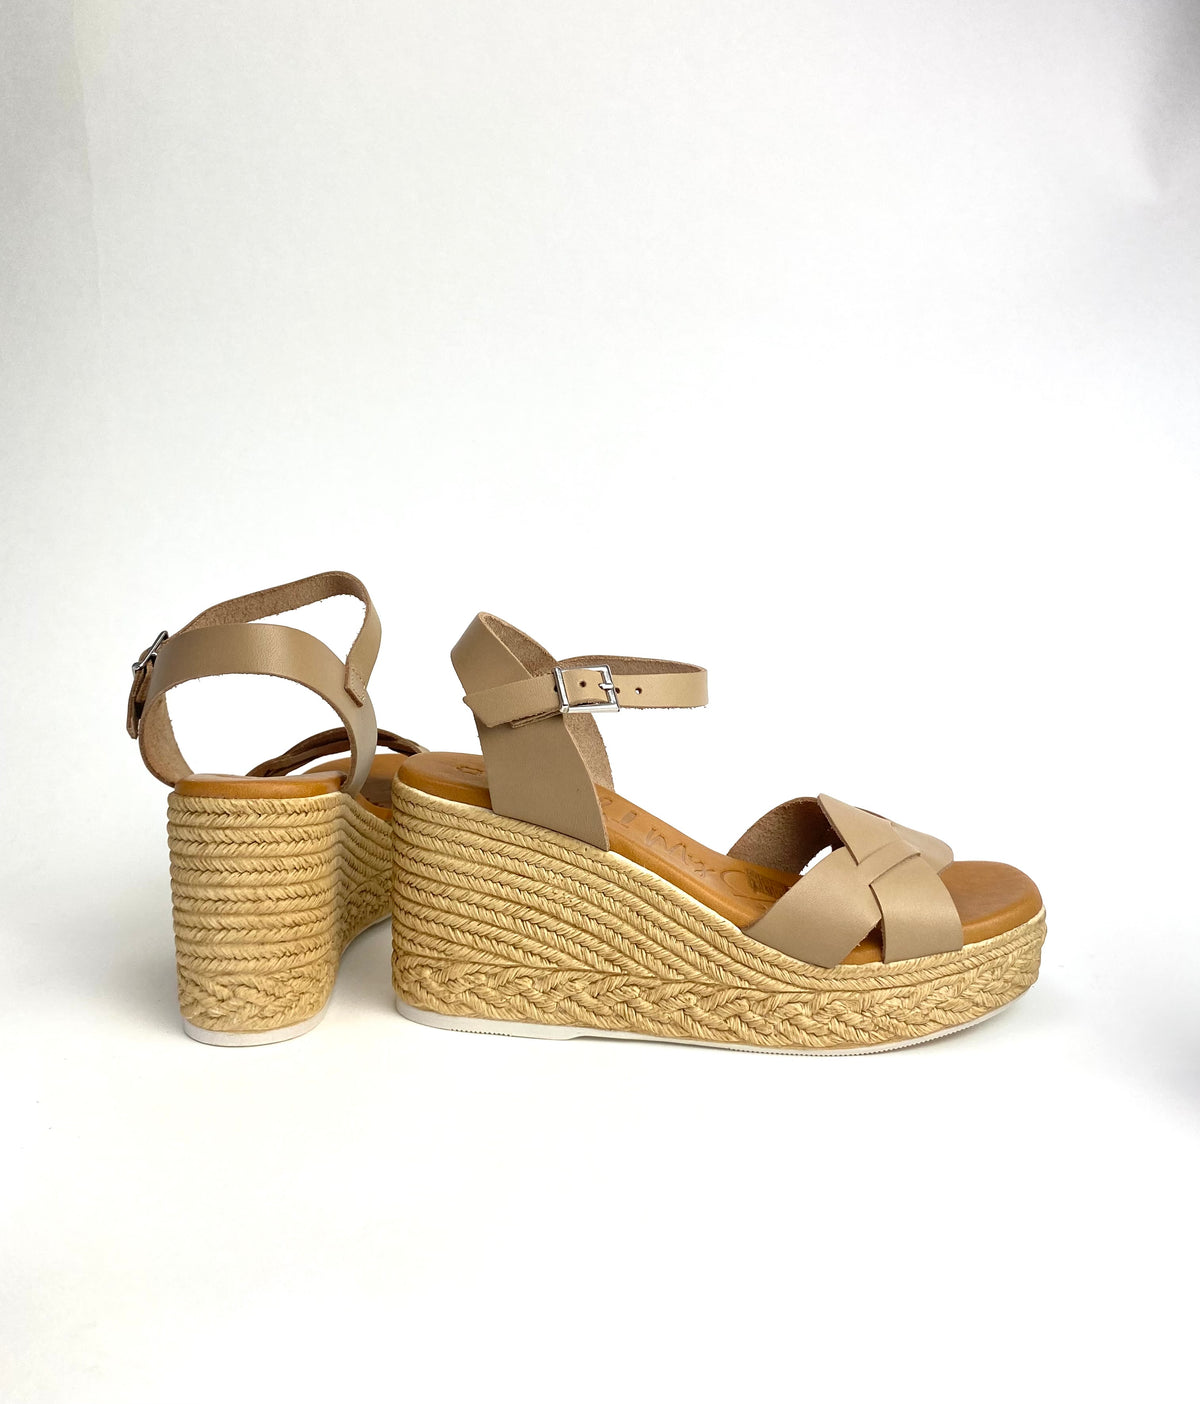 Oh My Sandals - 5460 Taupe Wedge Sandal